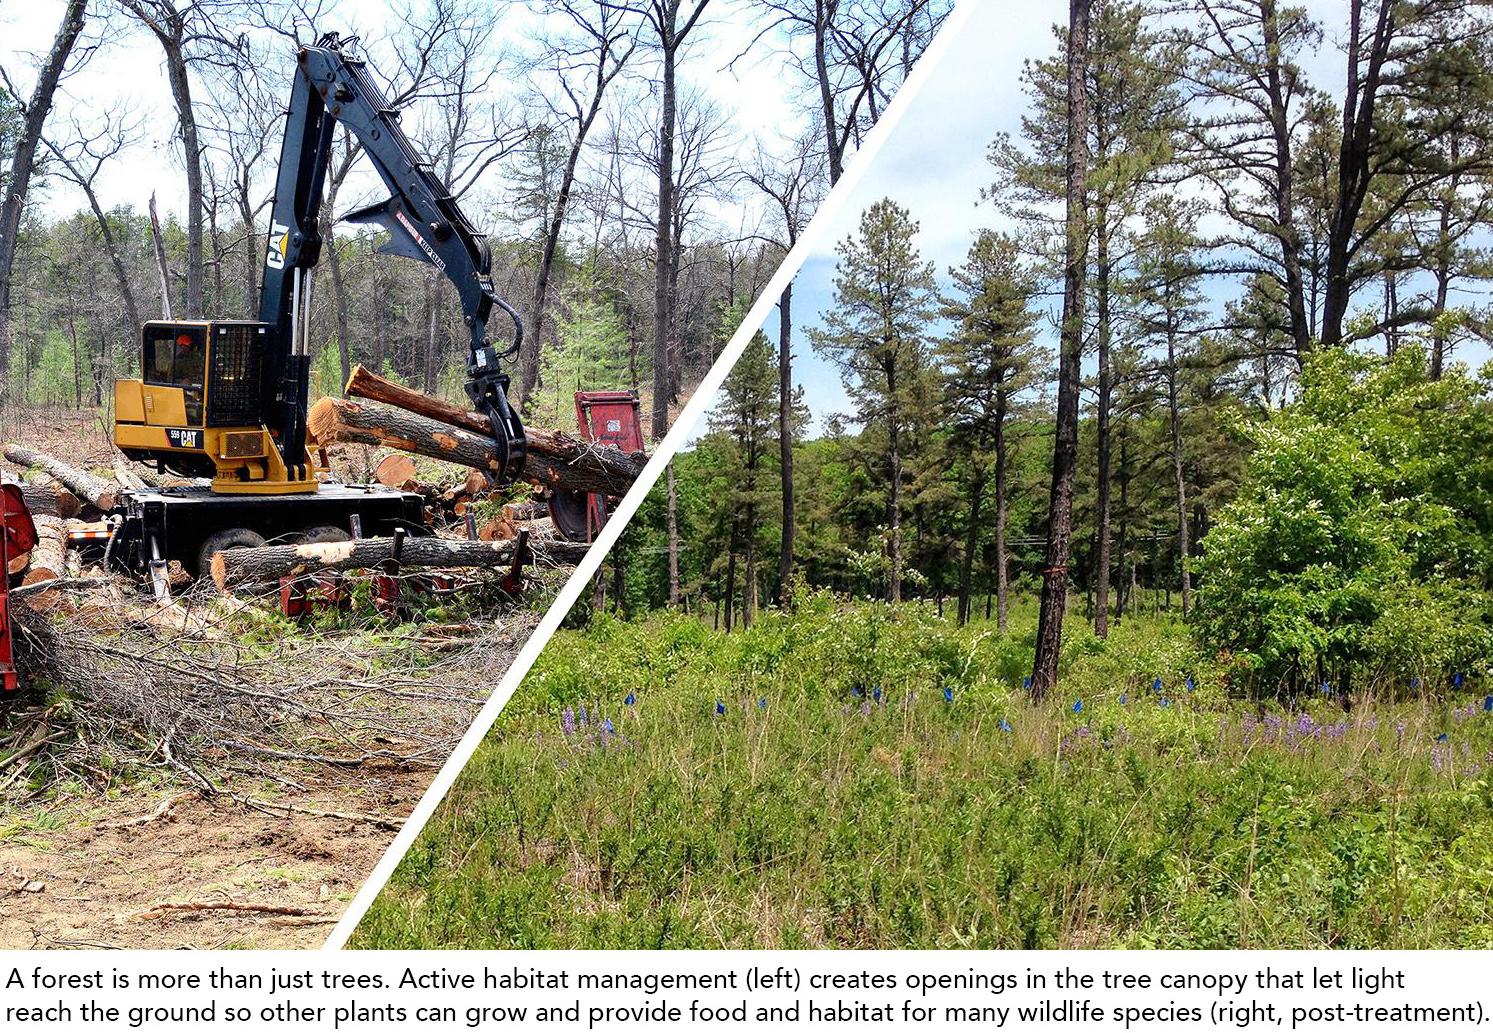 Before and after selective tree cutting on WMA;  Caption: A forest is more than just trees. Active habitat management (left) creates openings in the tree canopy that let lightreach the ground so other plants can grow and provide food and habitat for many wildlife species (right, post-treatment).